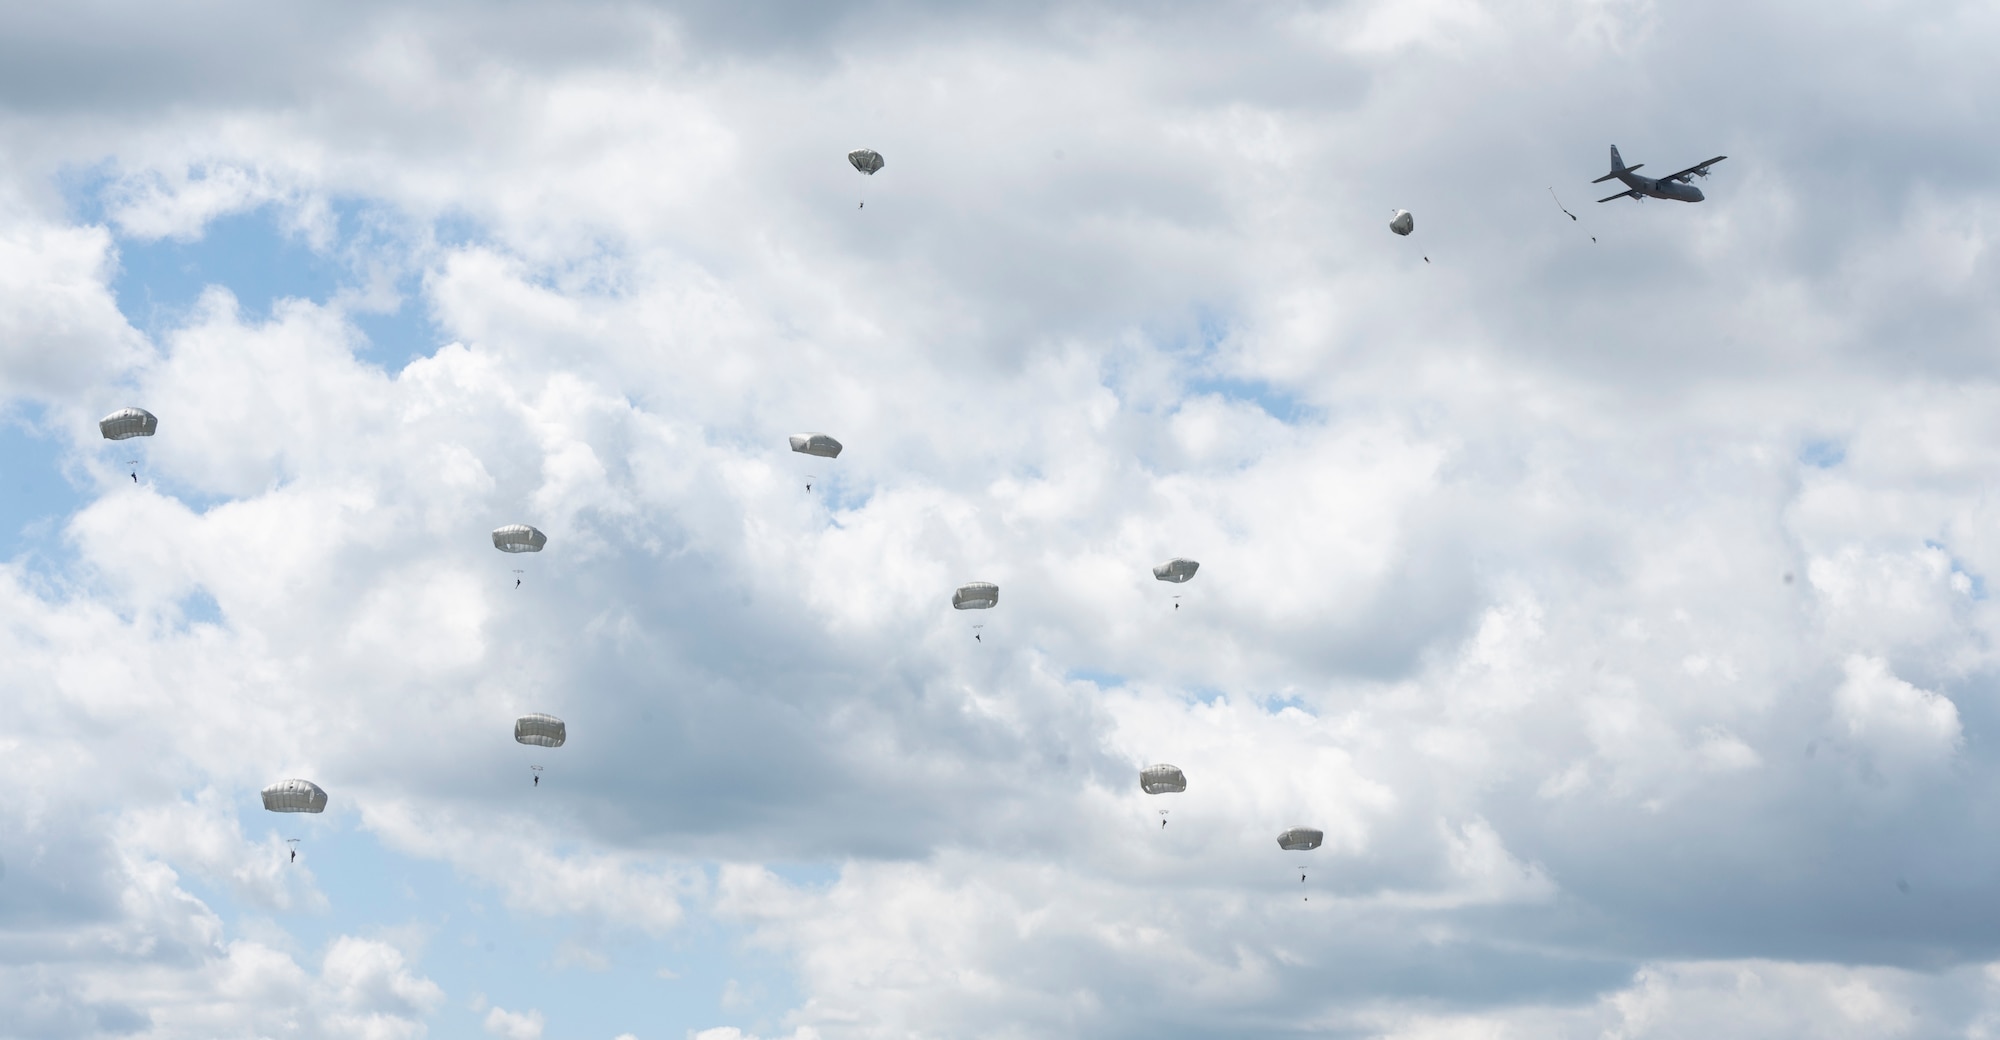 Eighty U.S. Army paratroopers jump from nine C-130J Super Hercules aircraft